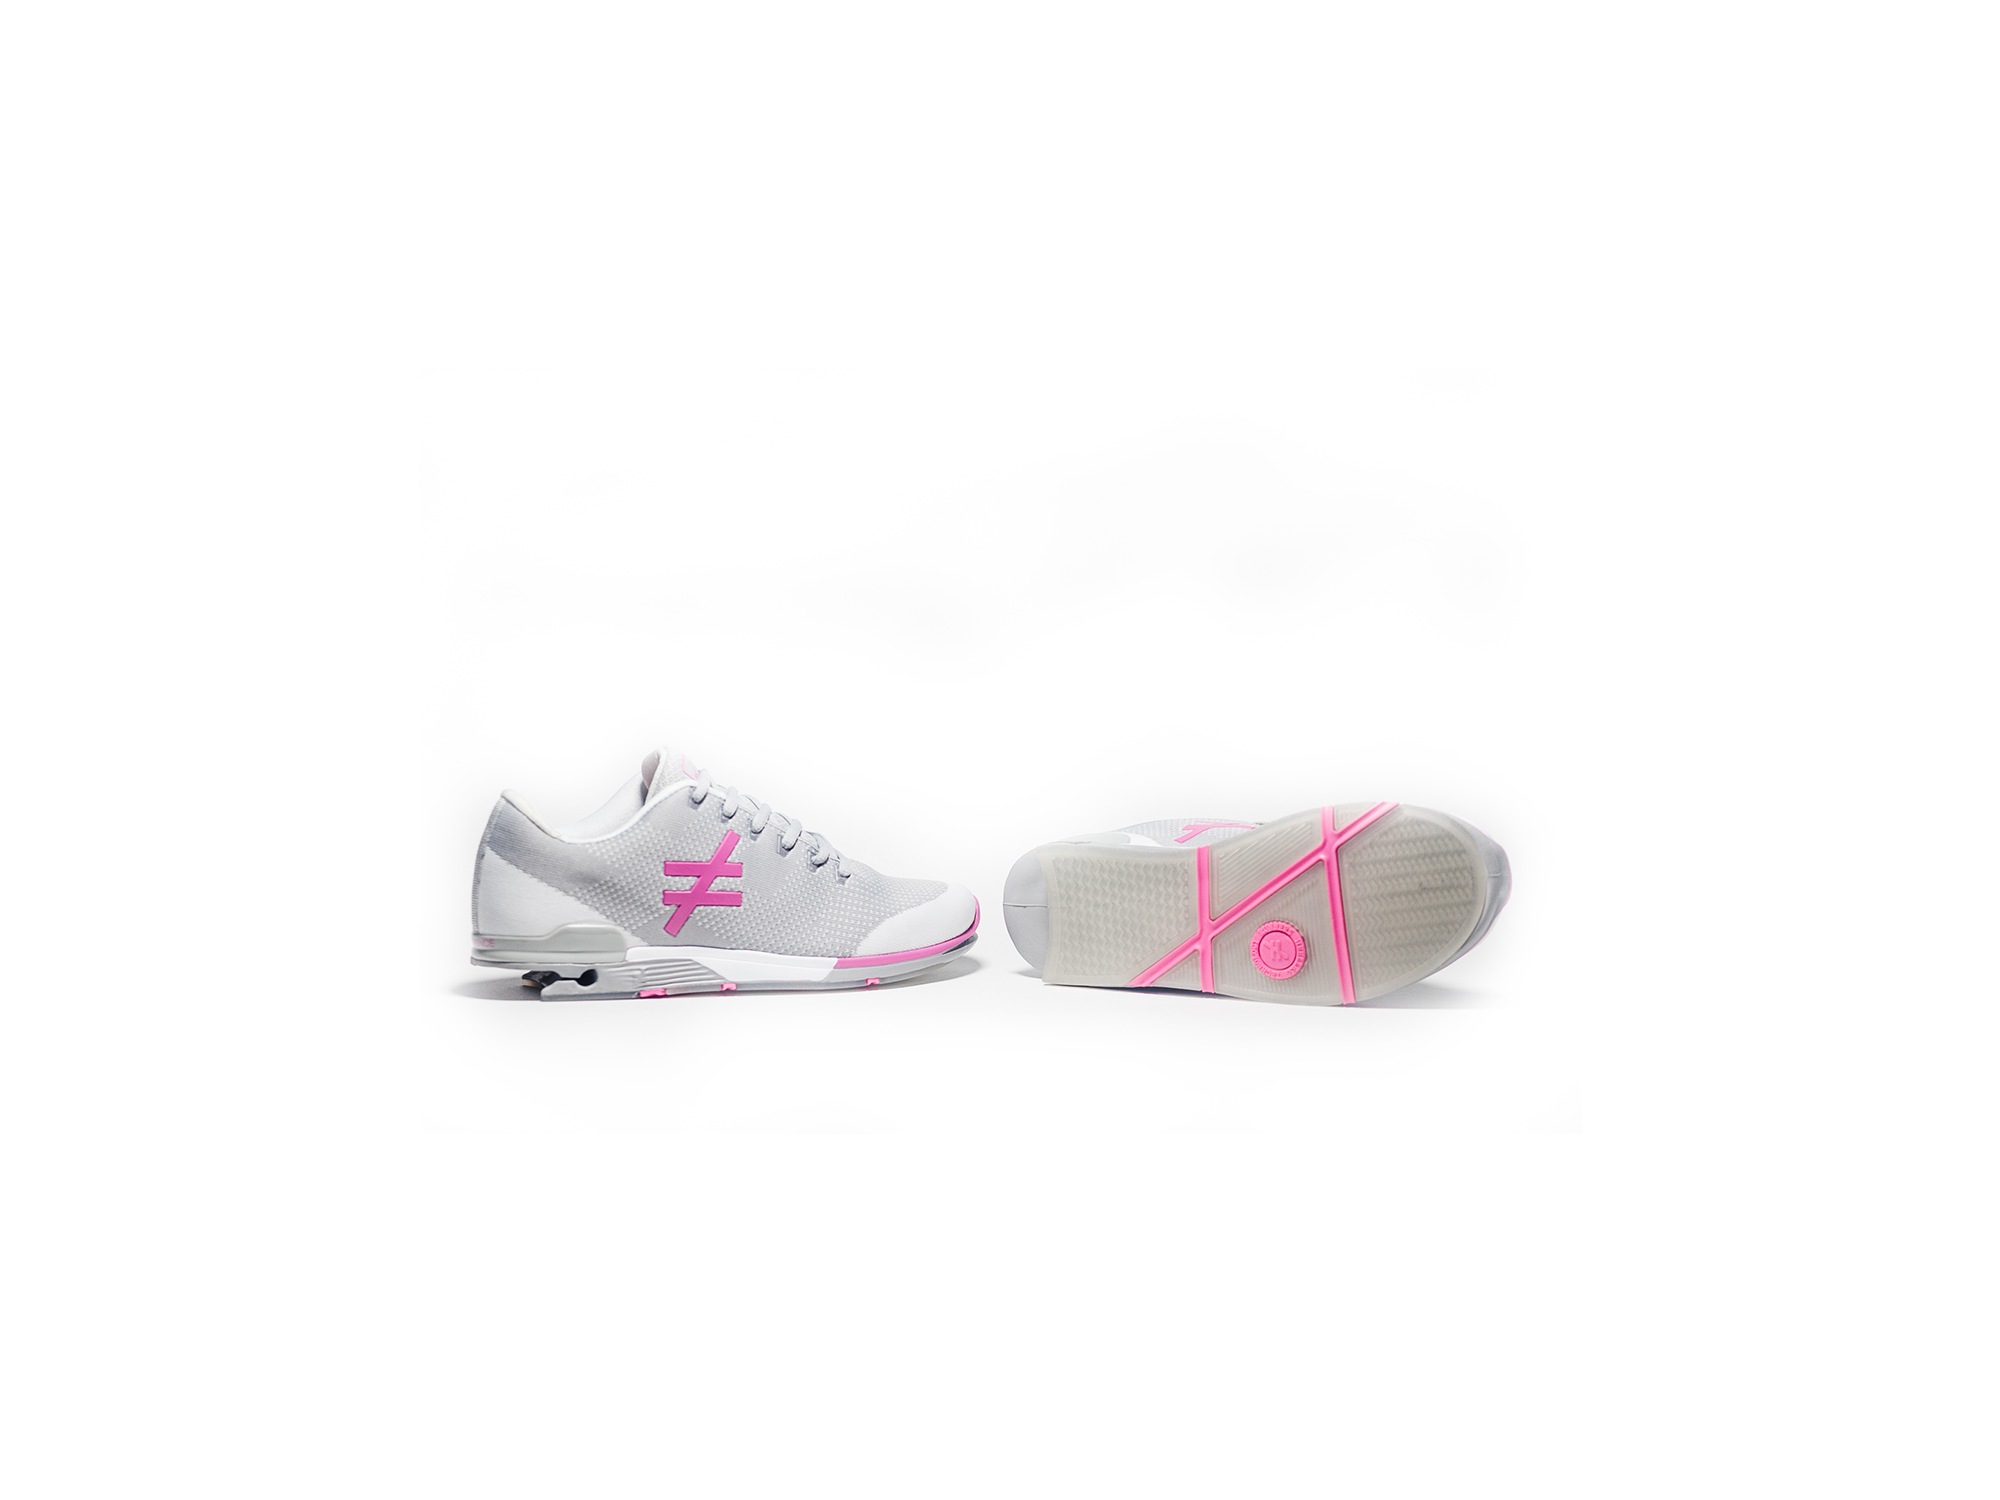 side and sole angle pair of the DIFFERENCE Runners heelless shoes pink